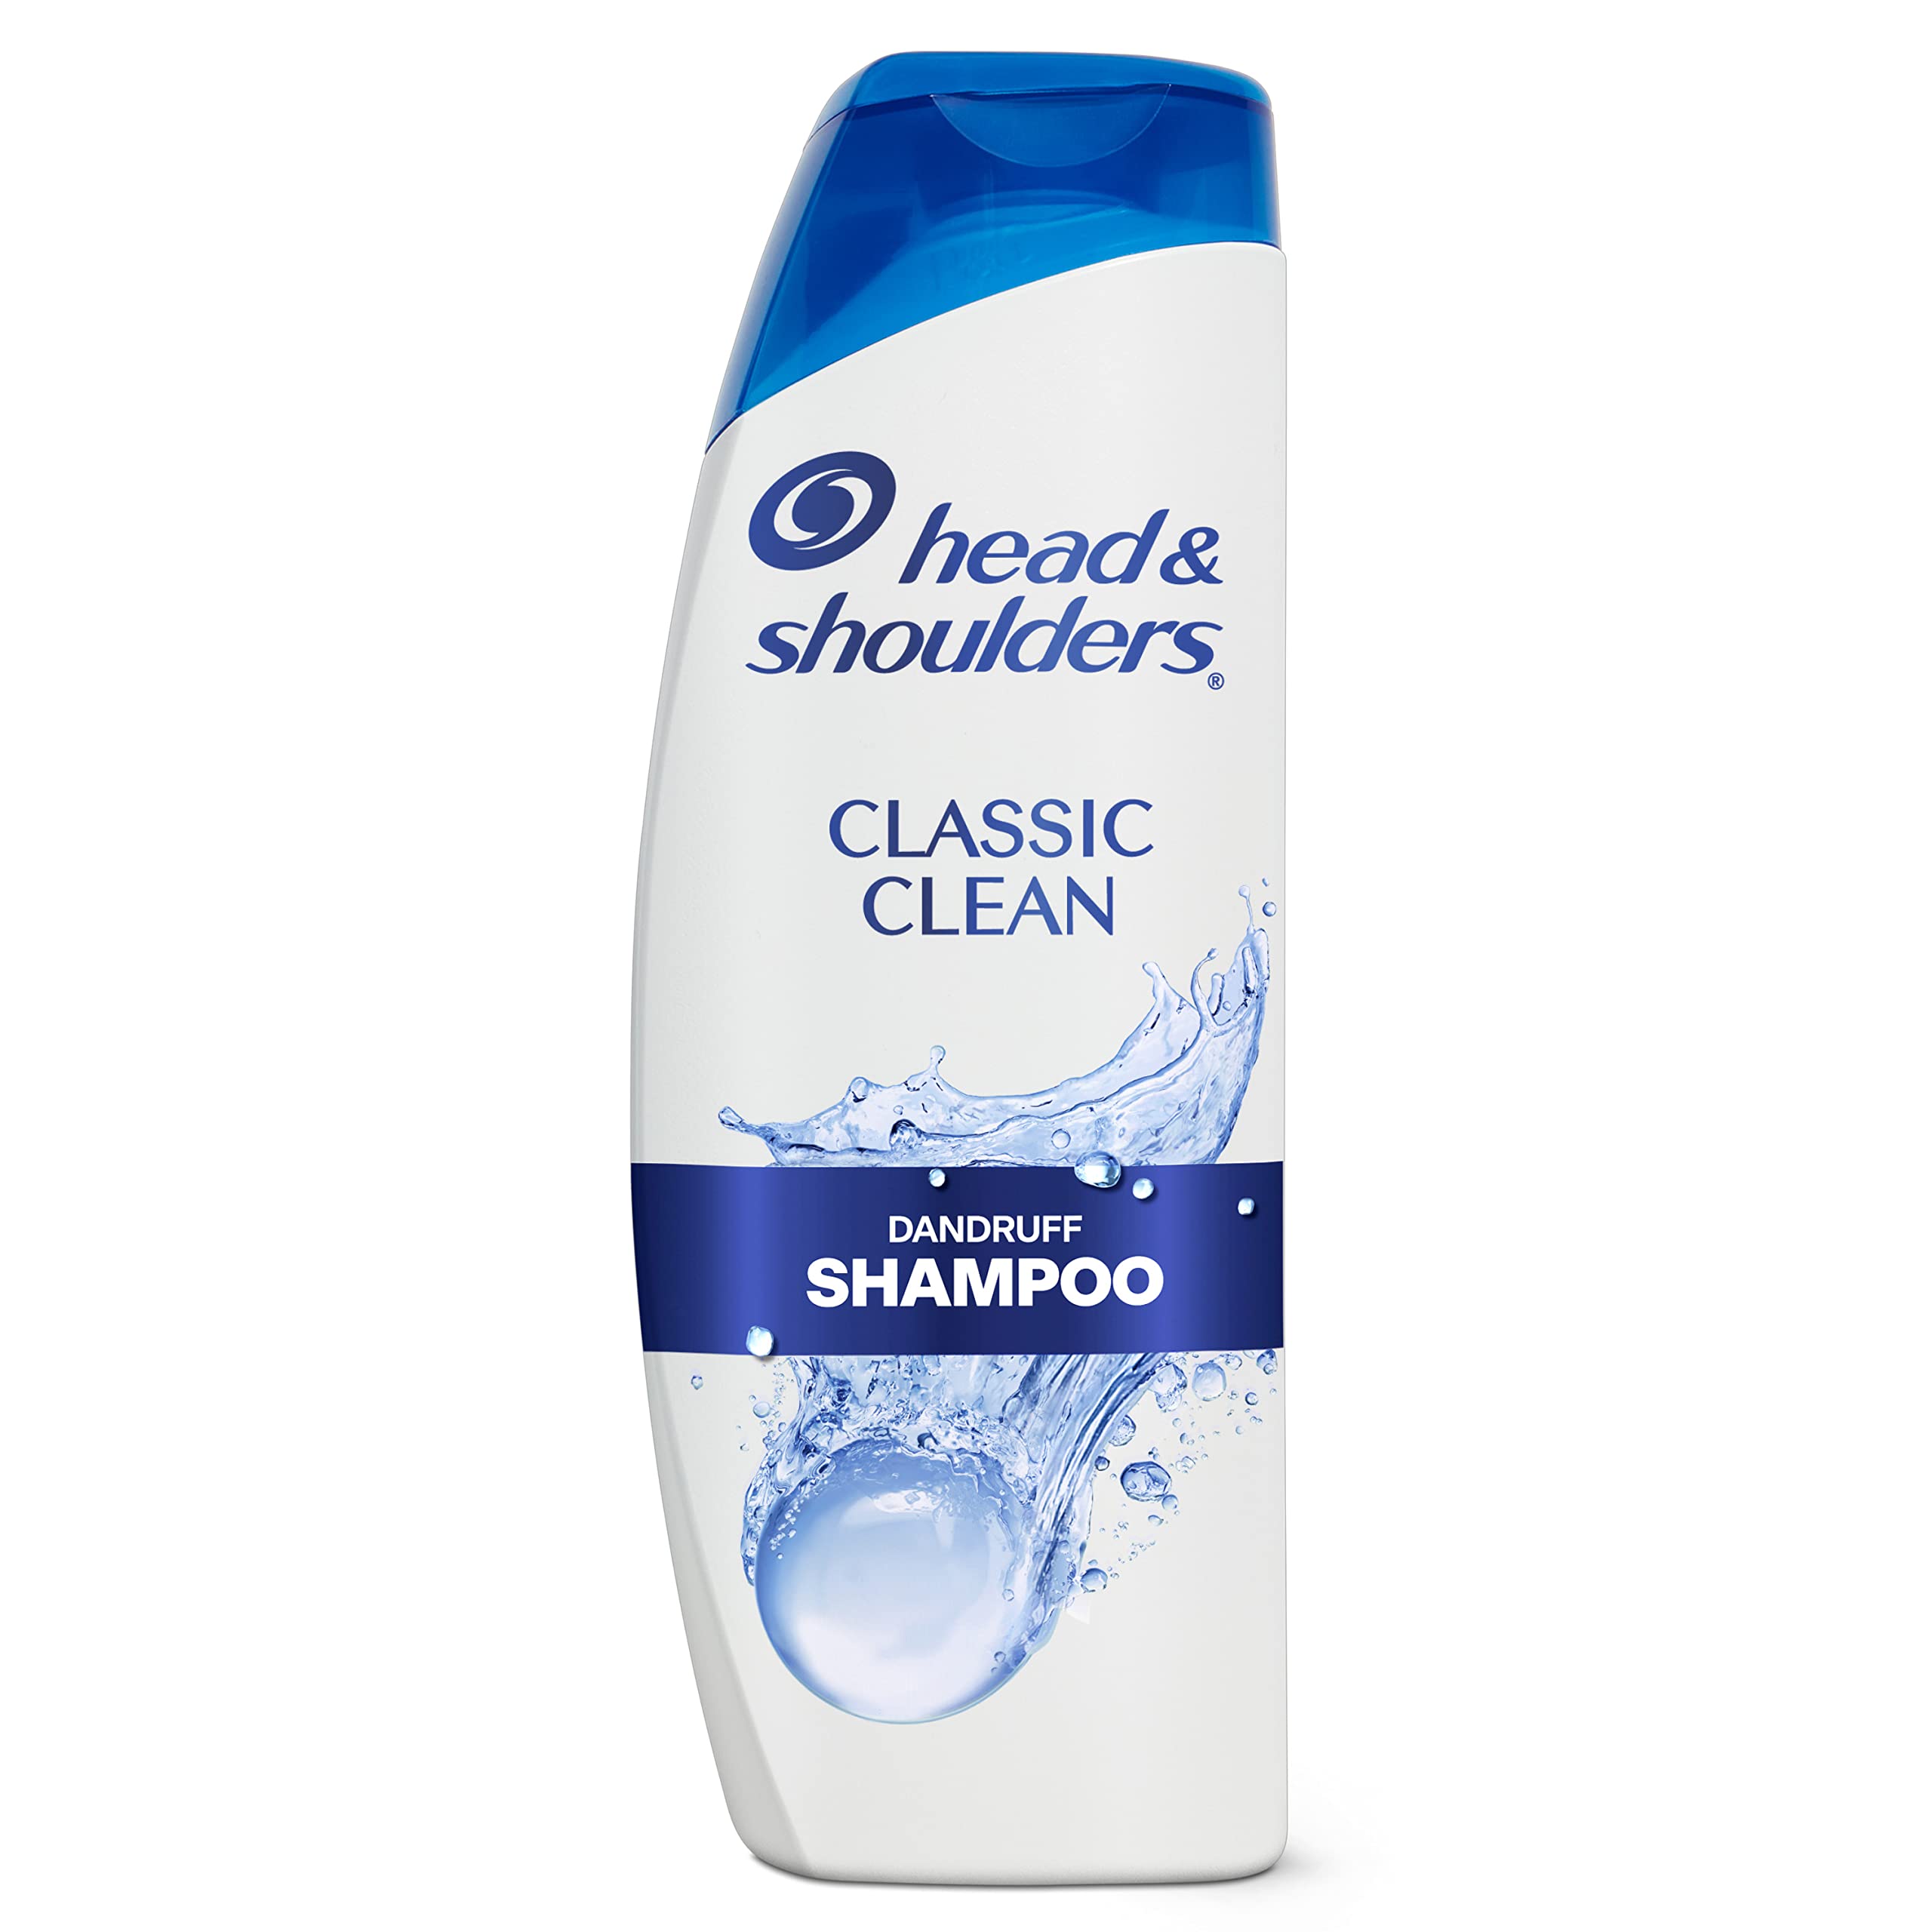 Head and Shoulders Dandruff Shampoo, Anti-Dandruff Treatment, Classic Clean for Daily Use, Paraben Free, 12.5 oz